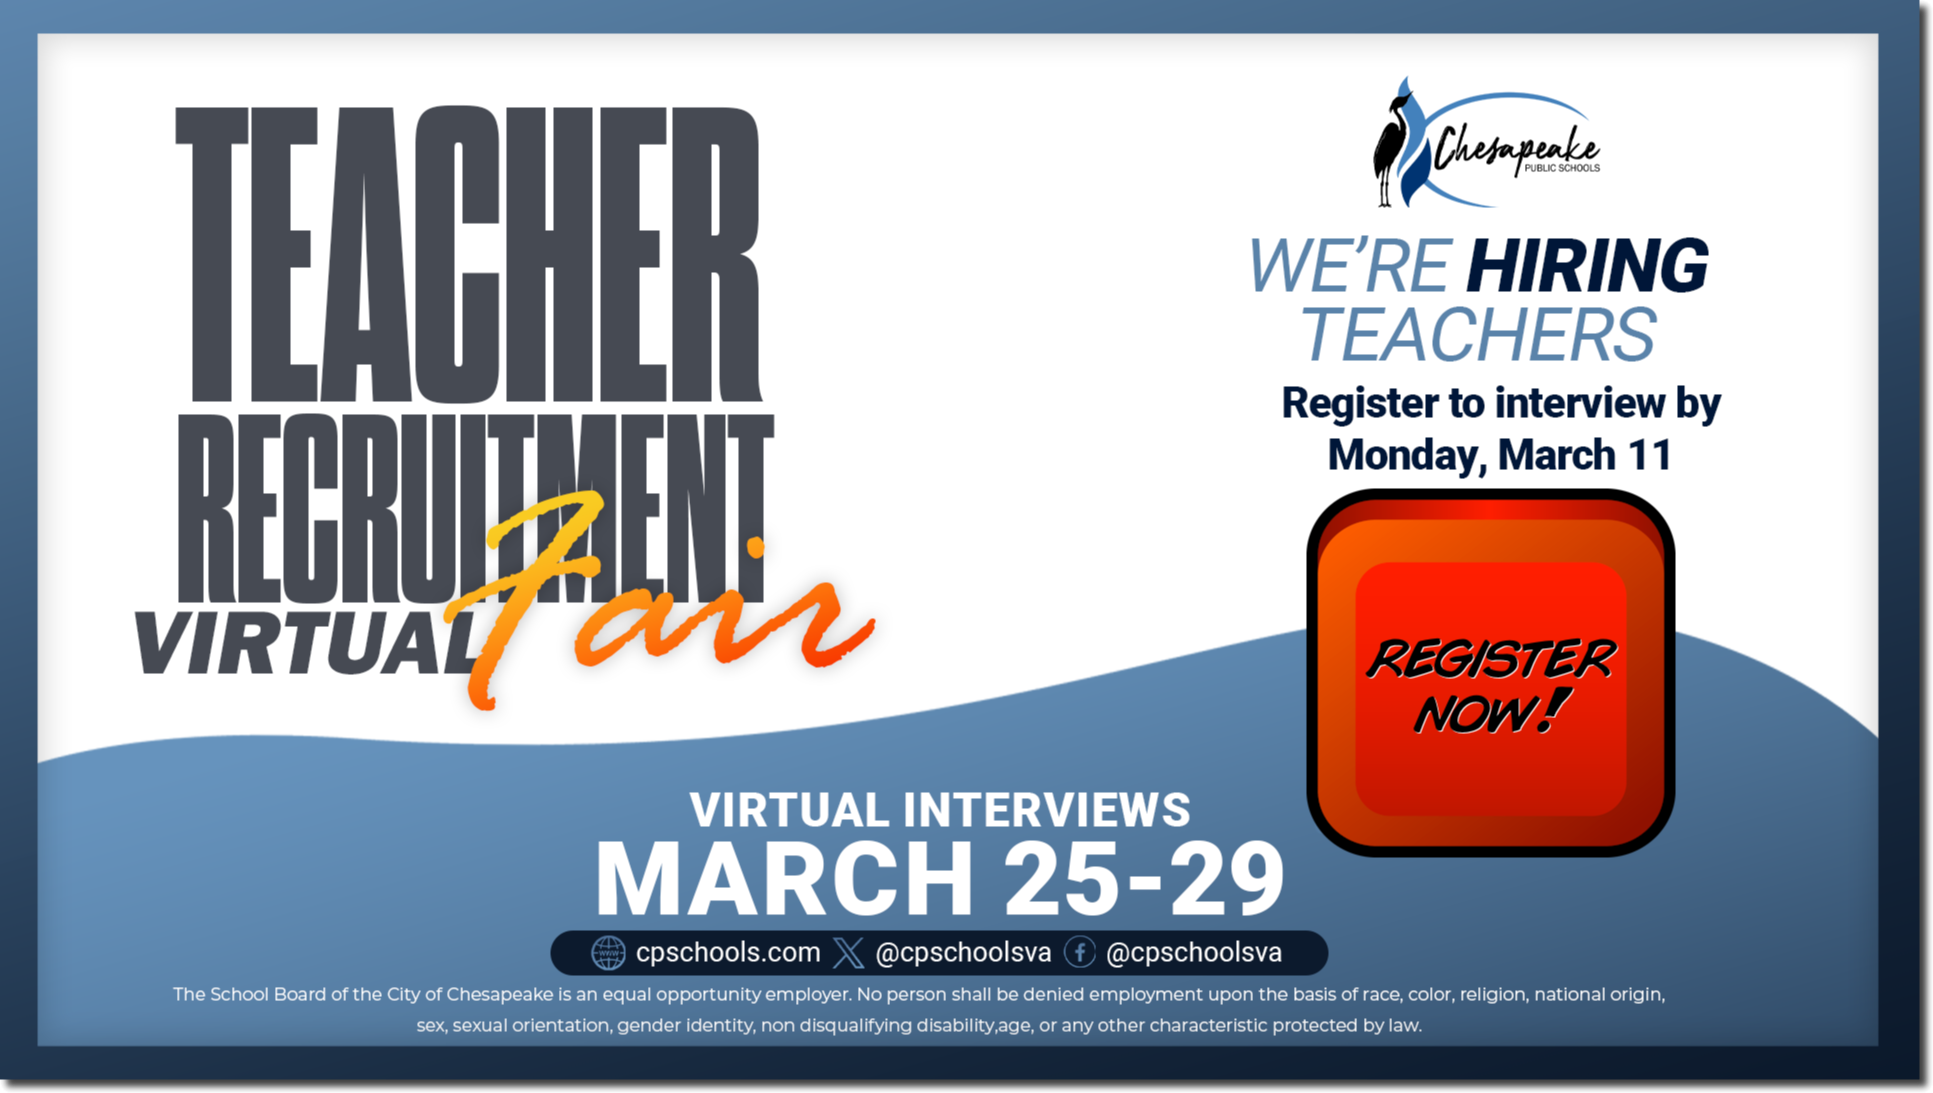 Chesapeake Public Schools (CPS) is hosting a Virtual Hiring Event! New and experienced teacher candidates are invited to register for a virtual interview. Candidates should complete a CPS application to upload their resume. To register for this event, please click here: https://docs.google.com/forms/d/180HFZtZNdDZEI1TpRN_Puyuj7rL5iSSGpWwAmOHZxIg/viewform?edit_requested=true Be sure to submit your online teaching application online: https://www.cpschools.com/.../page/employment-opportunities 